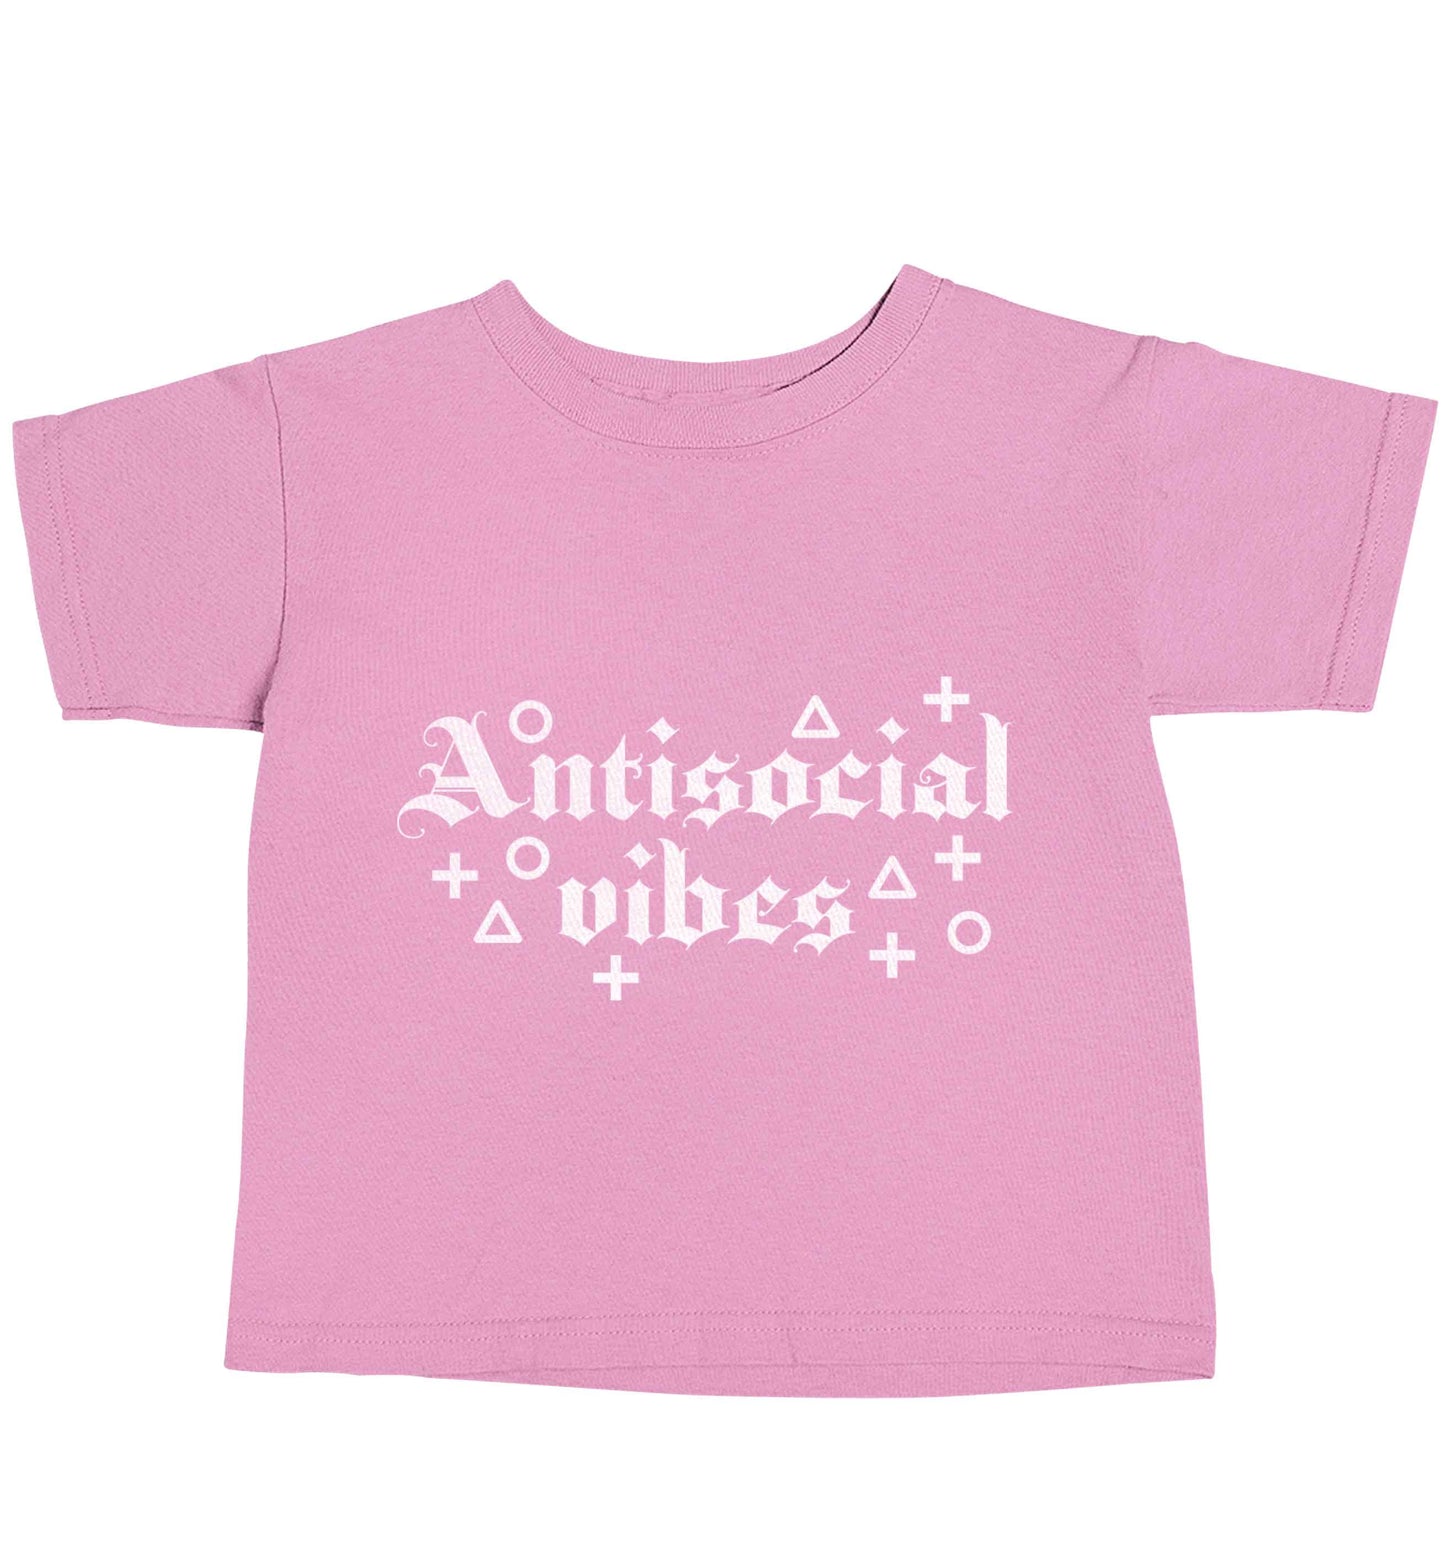 Antisocial vibes light pink baby toddler Tshirt 2 Years